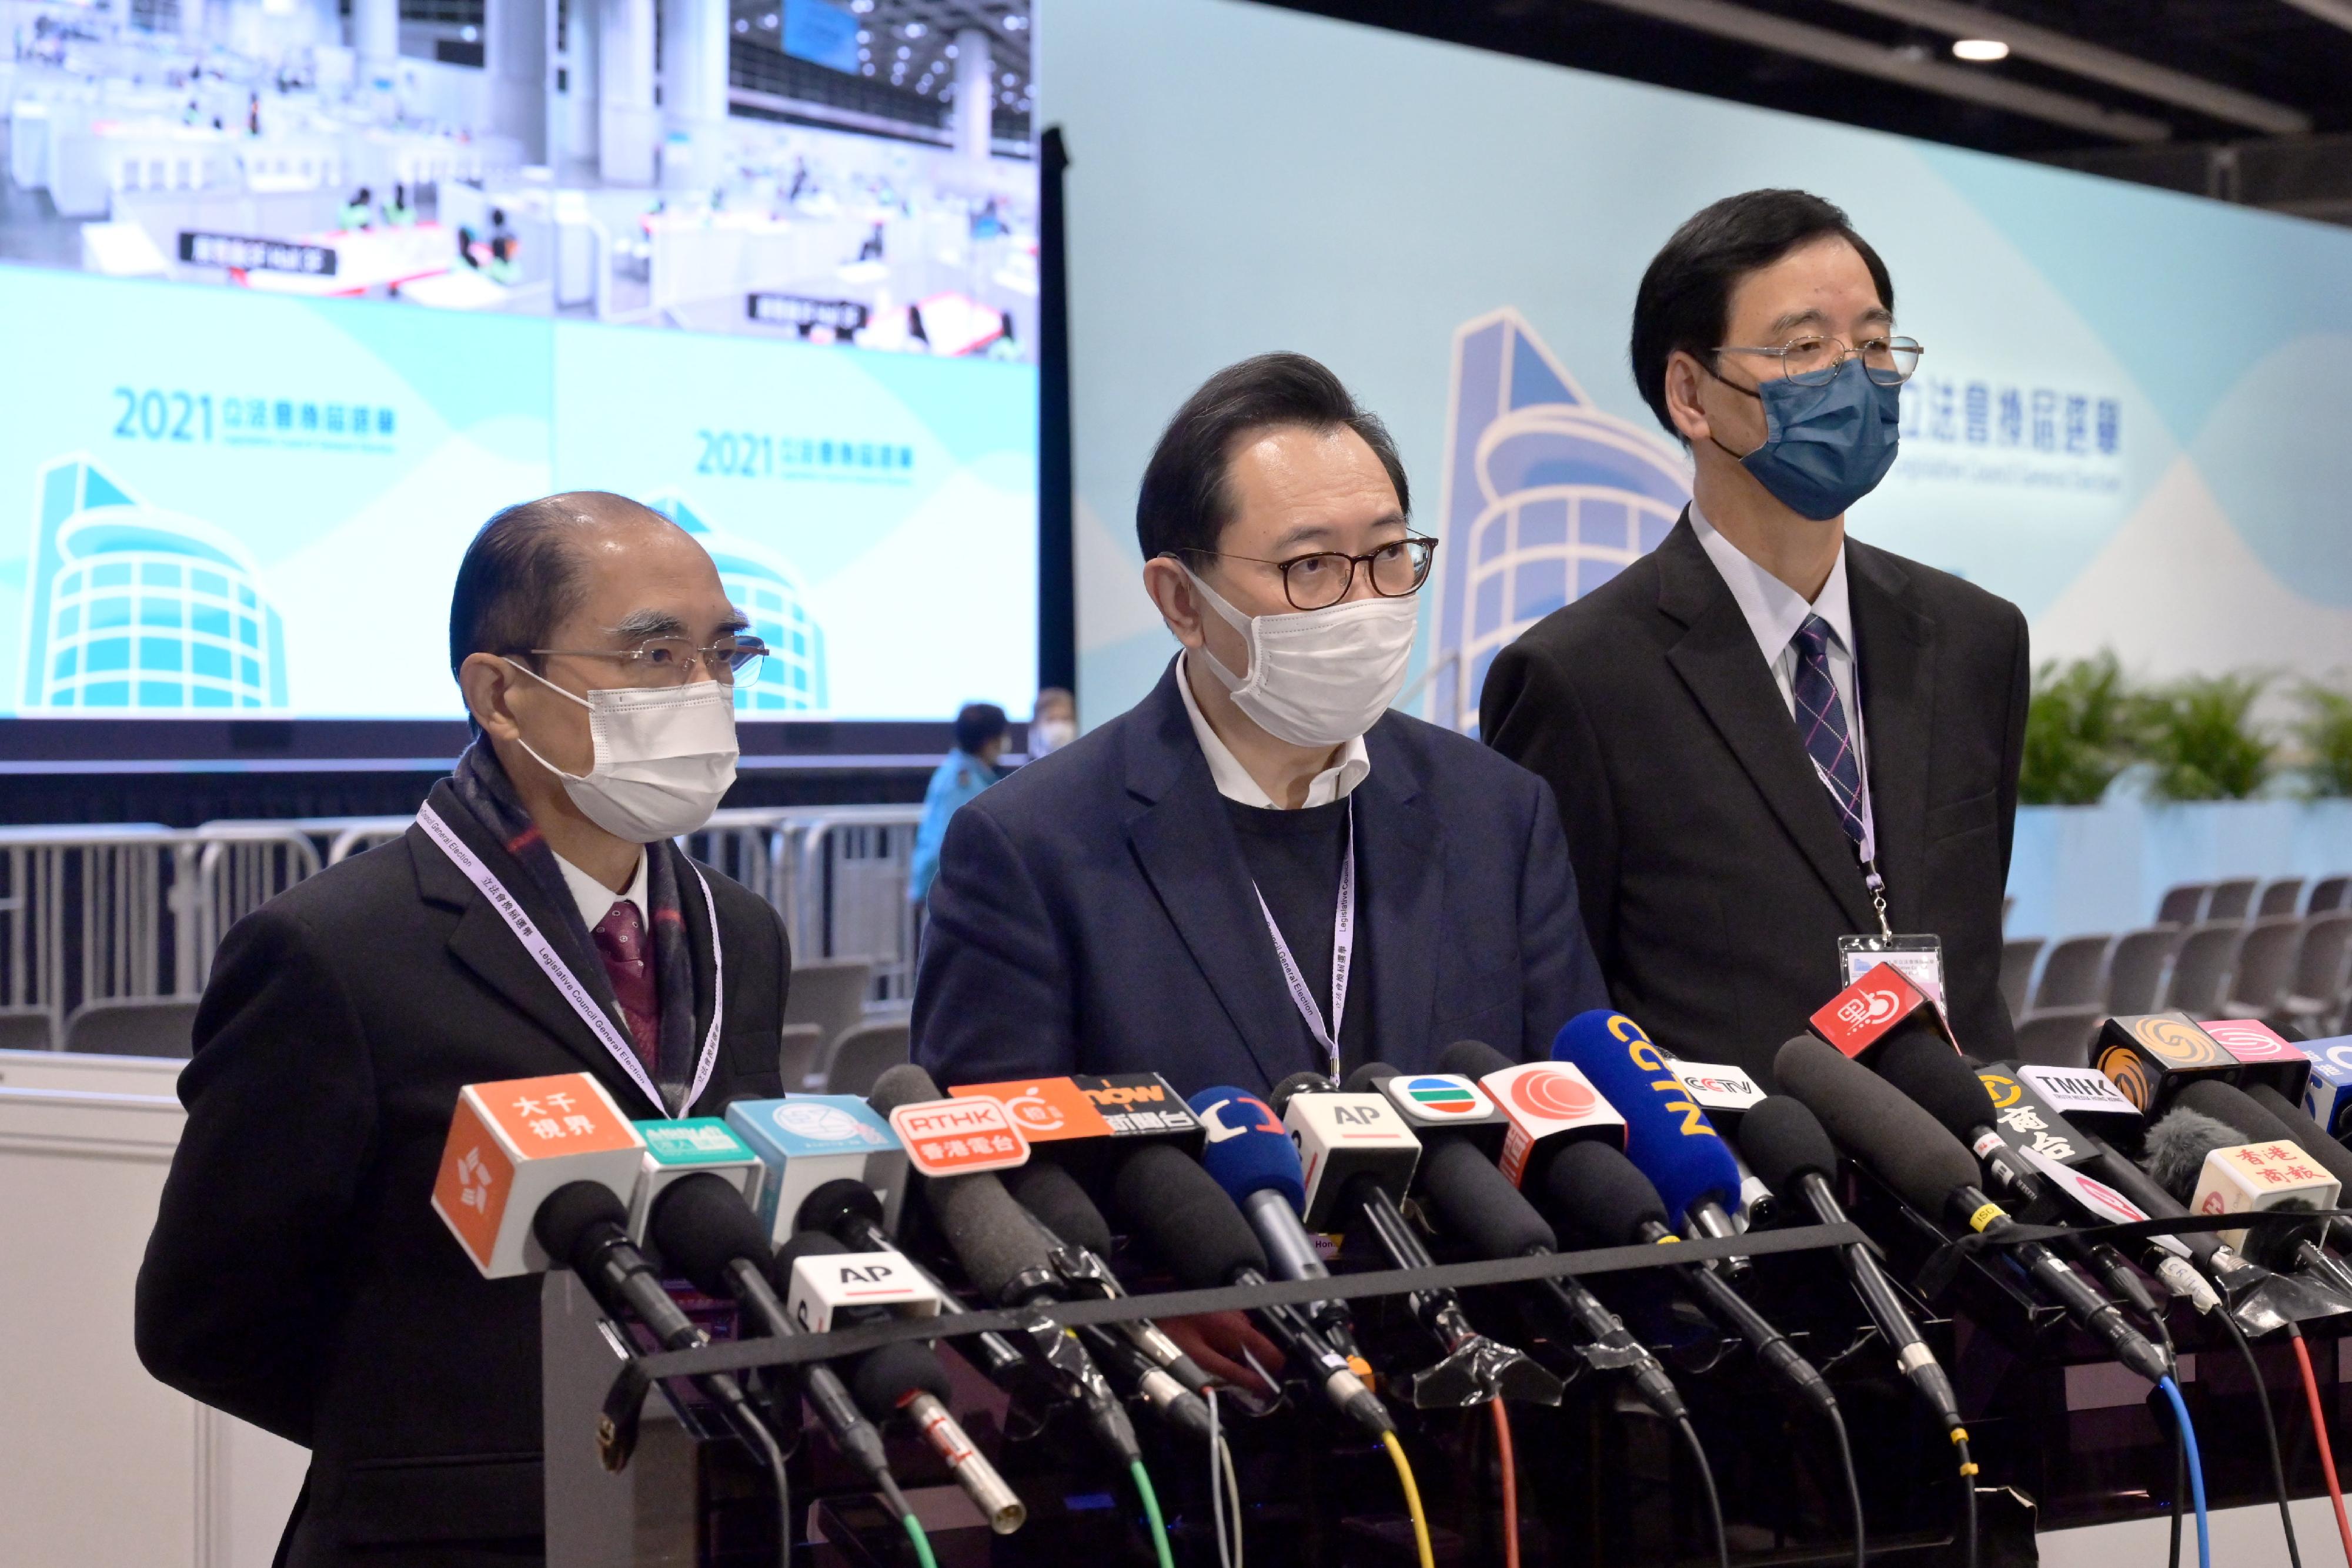 The Chairman of the Electoral Affairs Commission (EAC), Mr Justice Barnabas Fung Wah (centre), meets the media today (December 20) at the media centre of the 2021 Legislative Council General Election in the Hong Kong Convention and Exhibition Centre to conclude the polling arrangements. Also present are EAC members Mr Arthur Luk, SC (left) and Professor Daniel Shek (right).